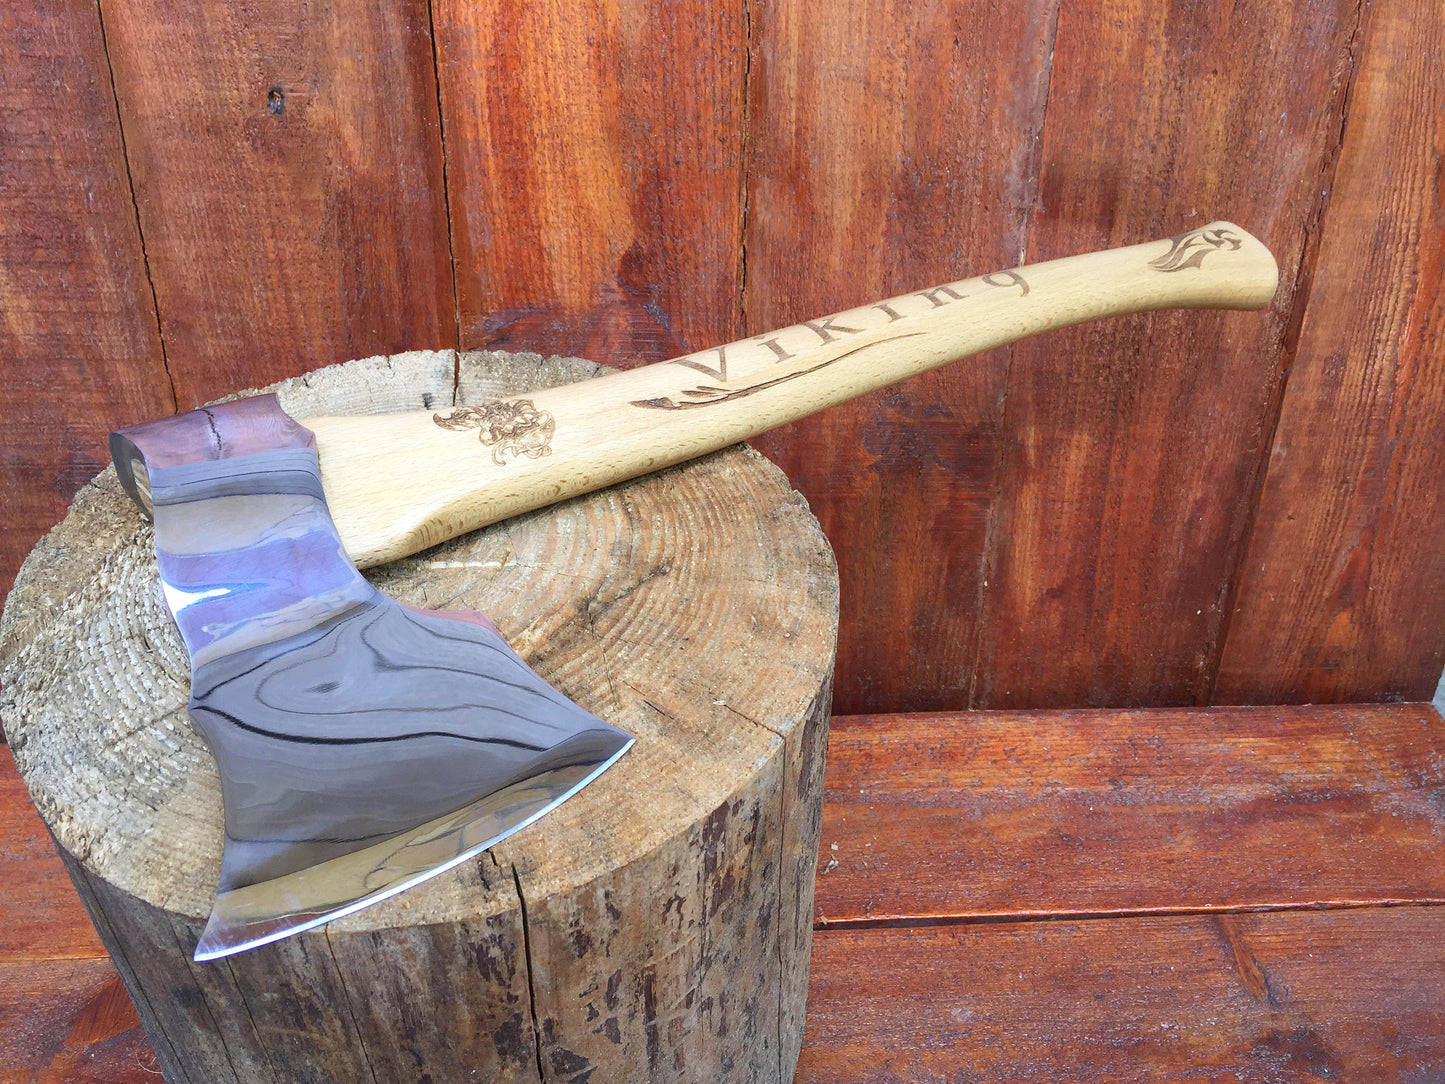 Viking axe, his gift, best man gift, iron gifts, his birthday gift, manly gifts,medieval axe,tomahawk,viking weapon,viking gift,viking decor